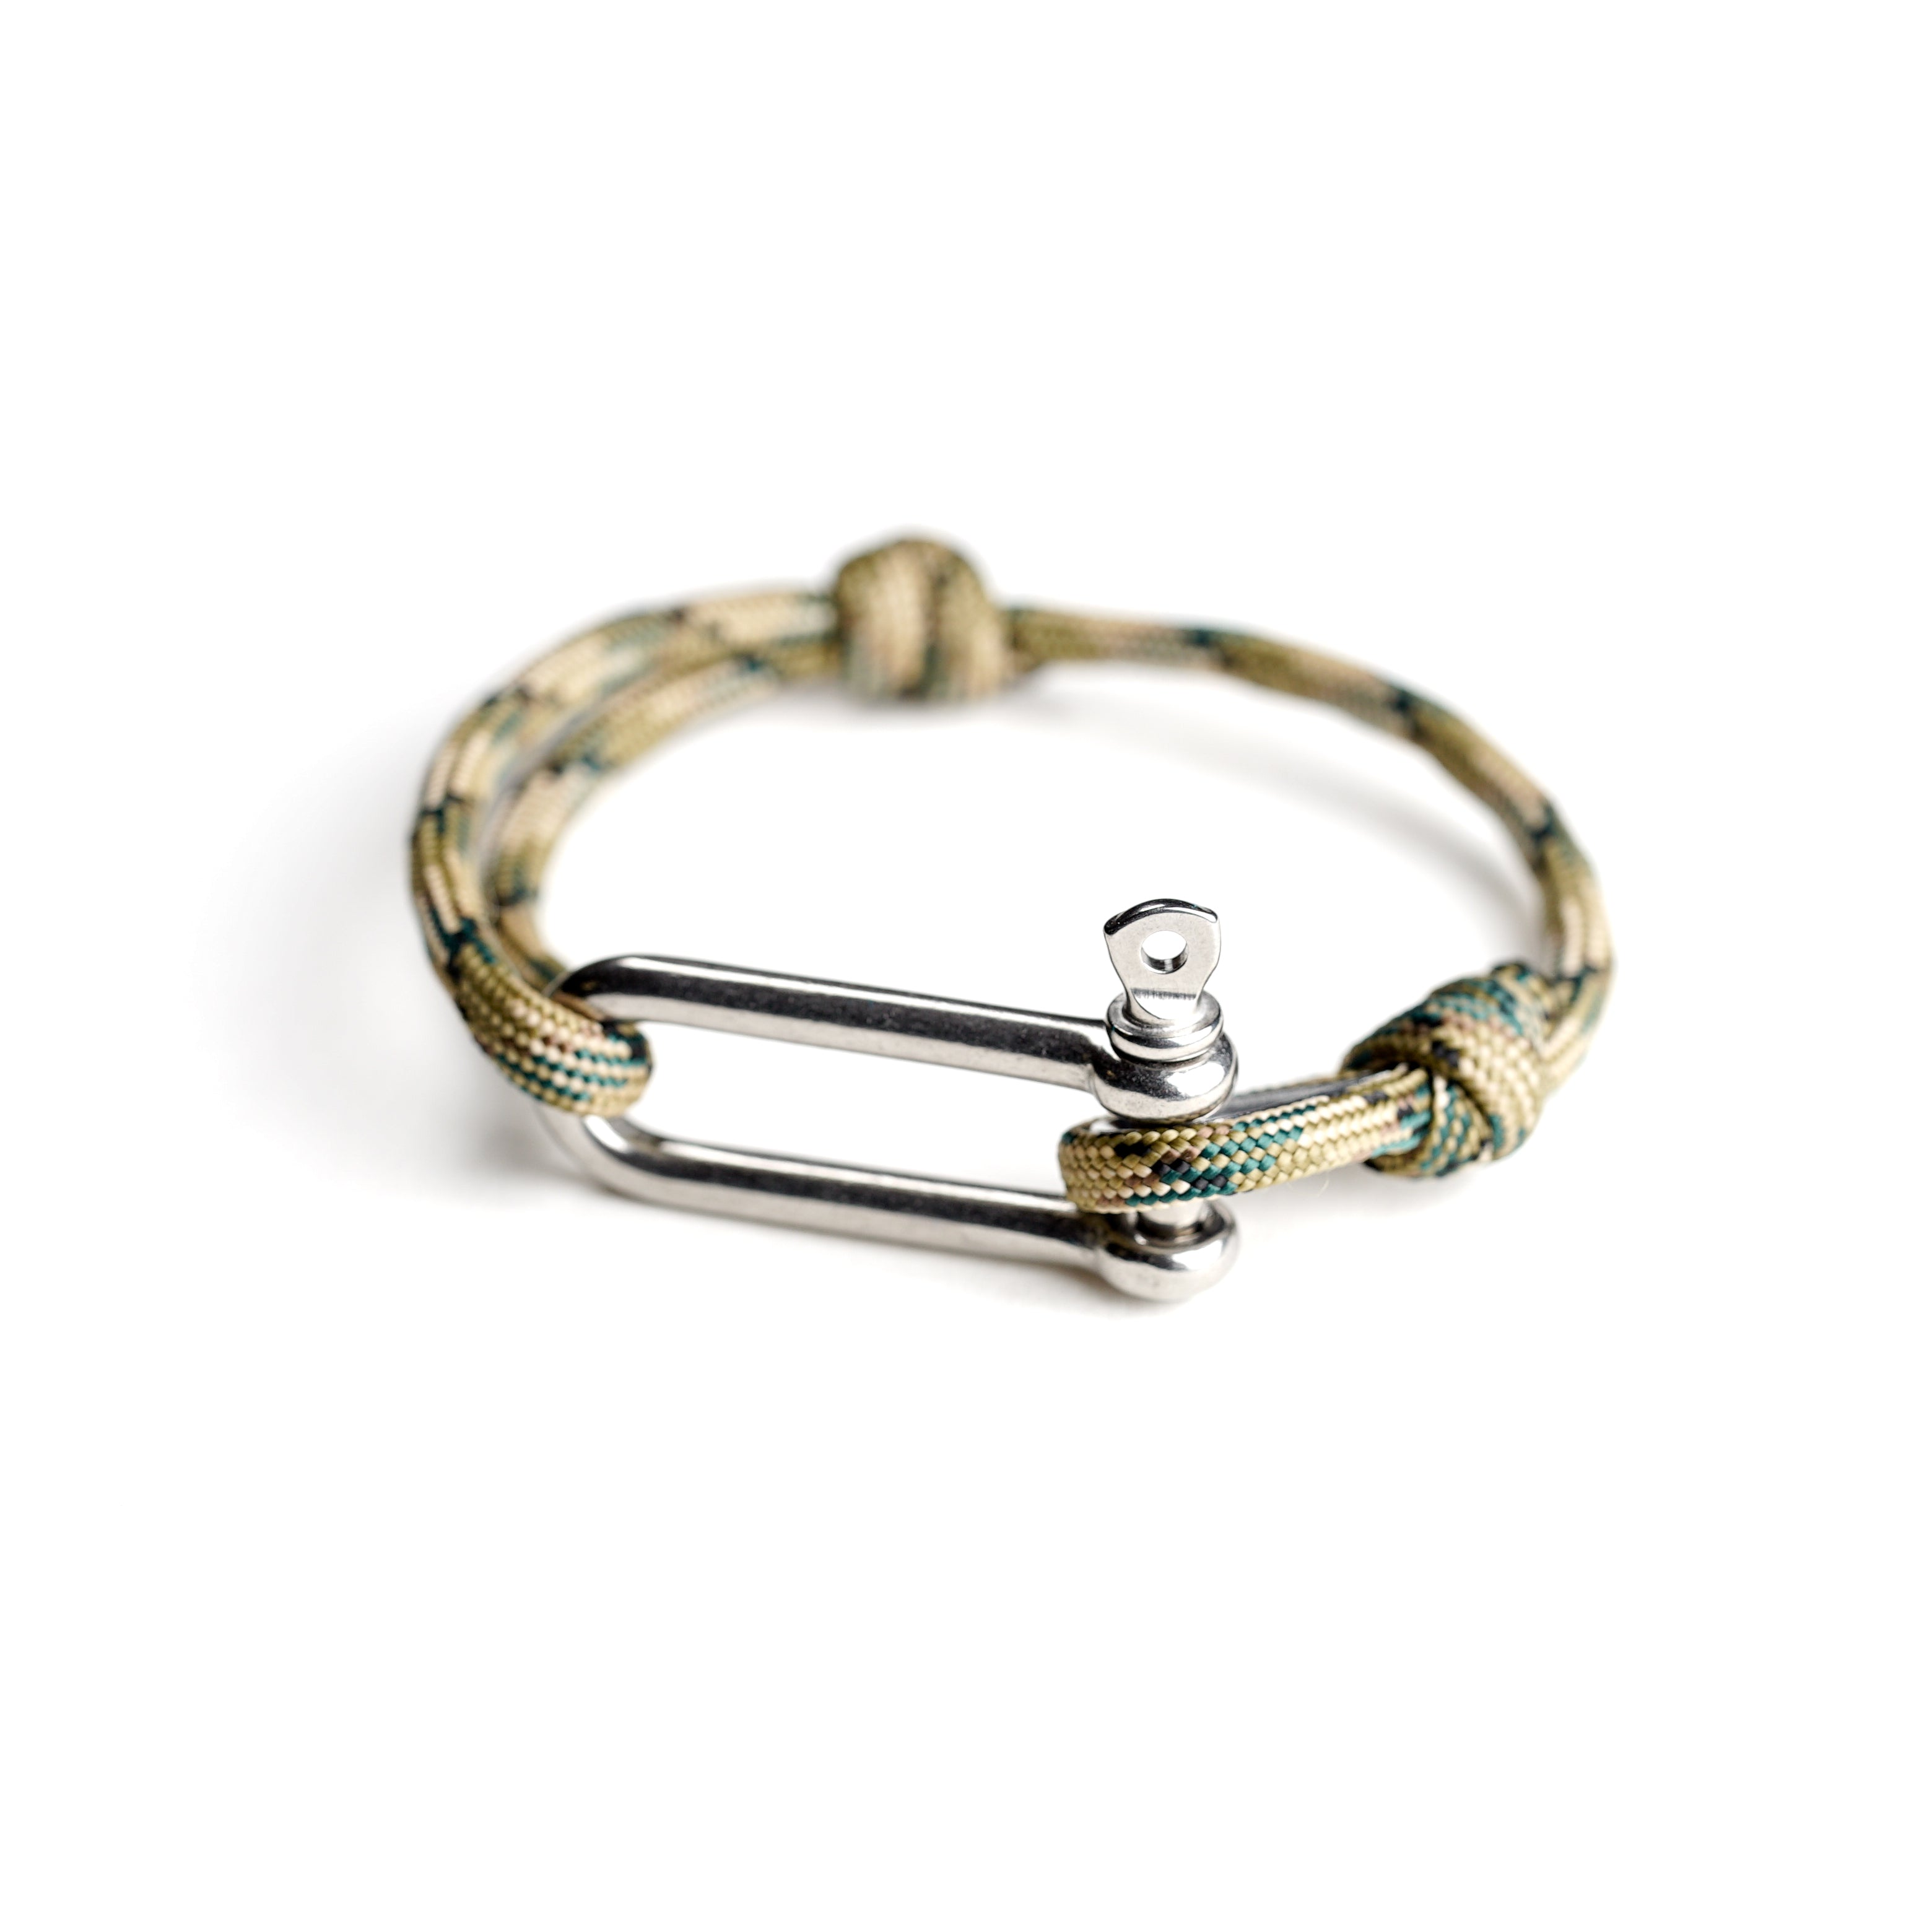 Paracord Nautical Bracelet with Stainless Steel Shackle - Light Green Camo